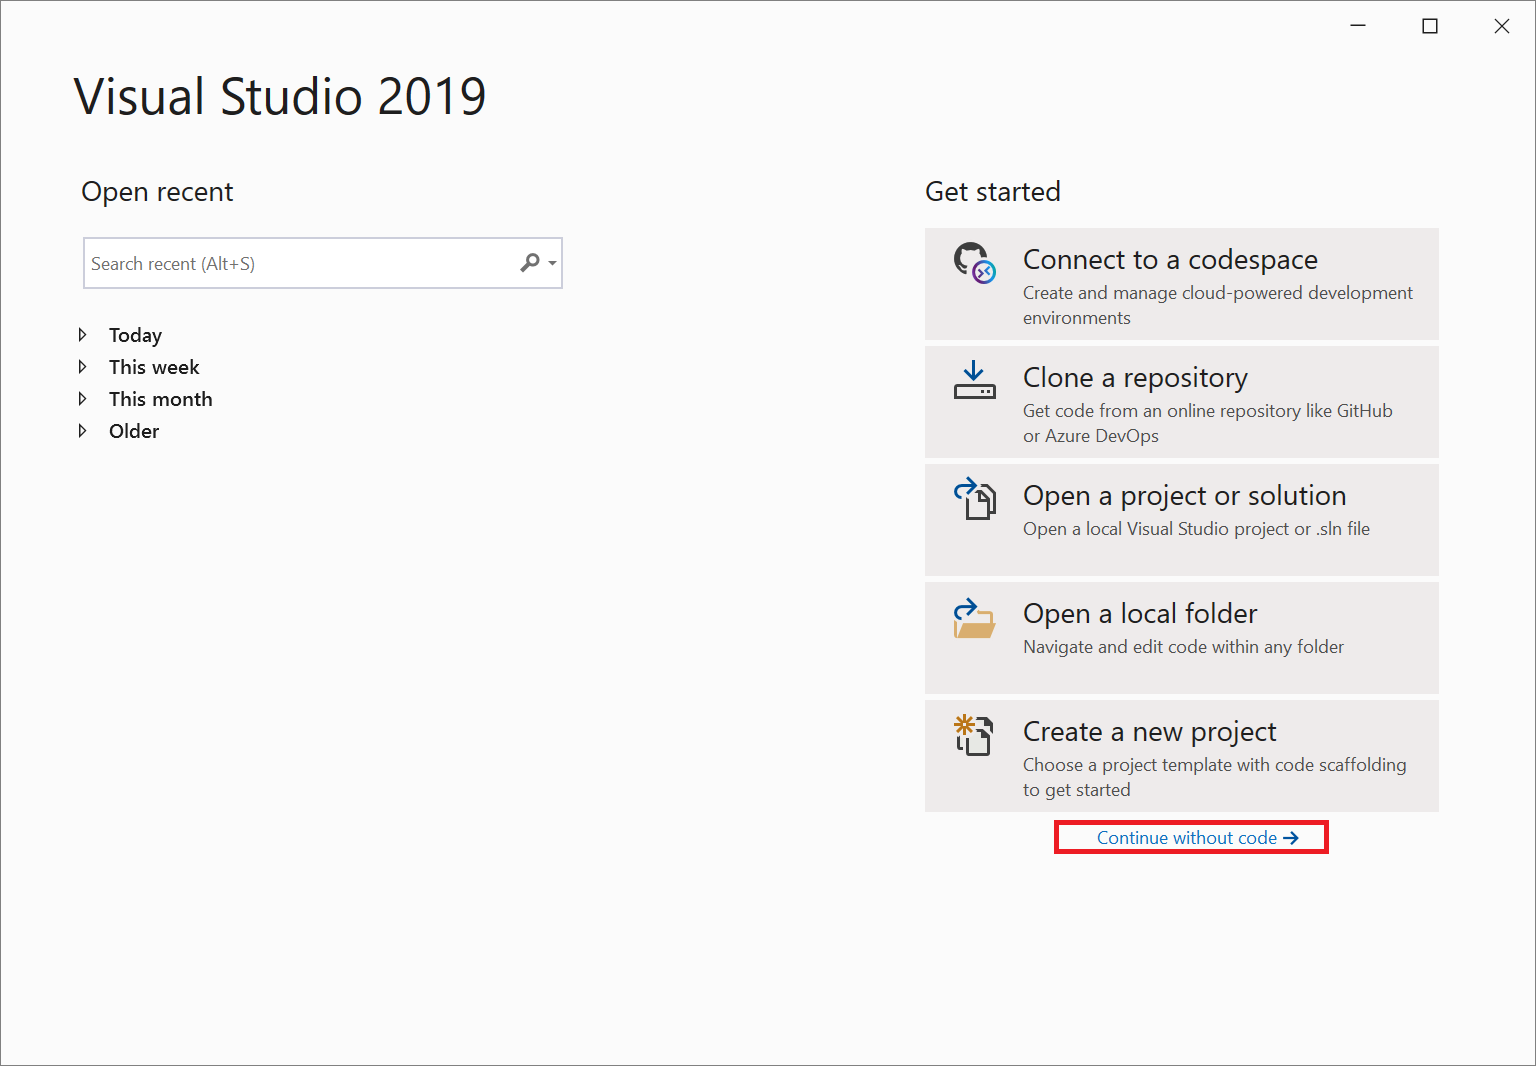 Screenshot of the Start window in Visual Studio 2019, with the 'Continue without code' link highlighted.